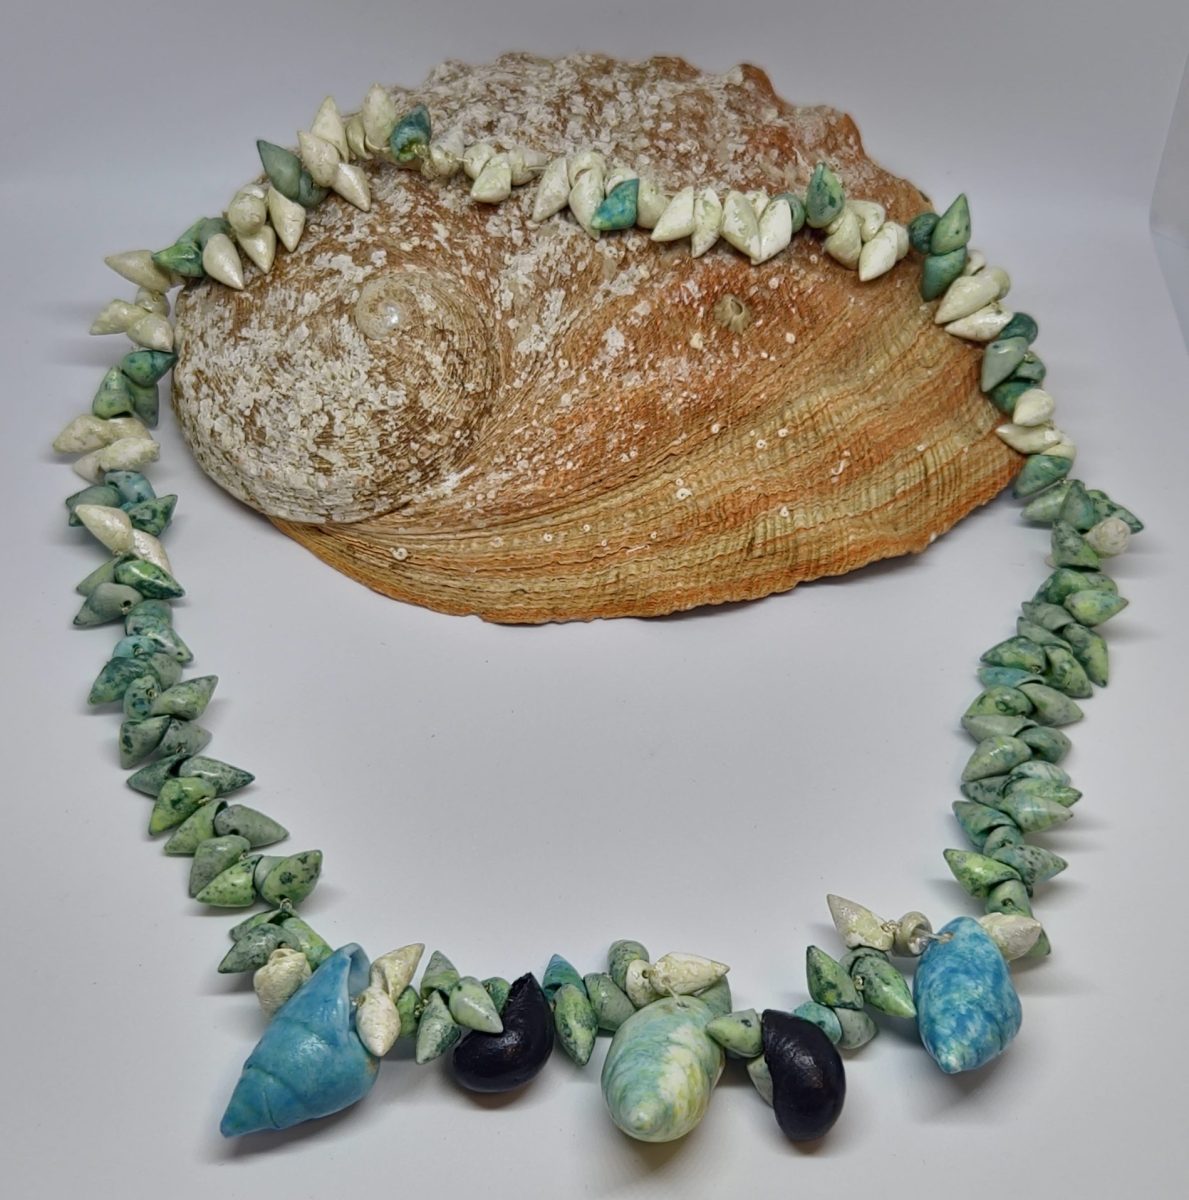 Shell nacklace